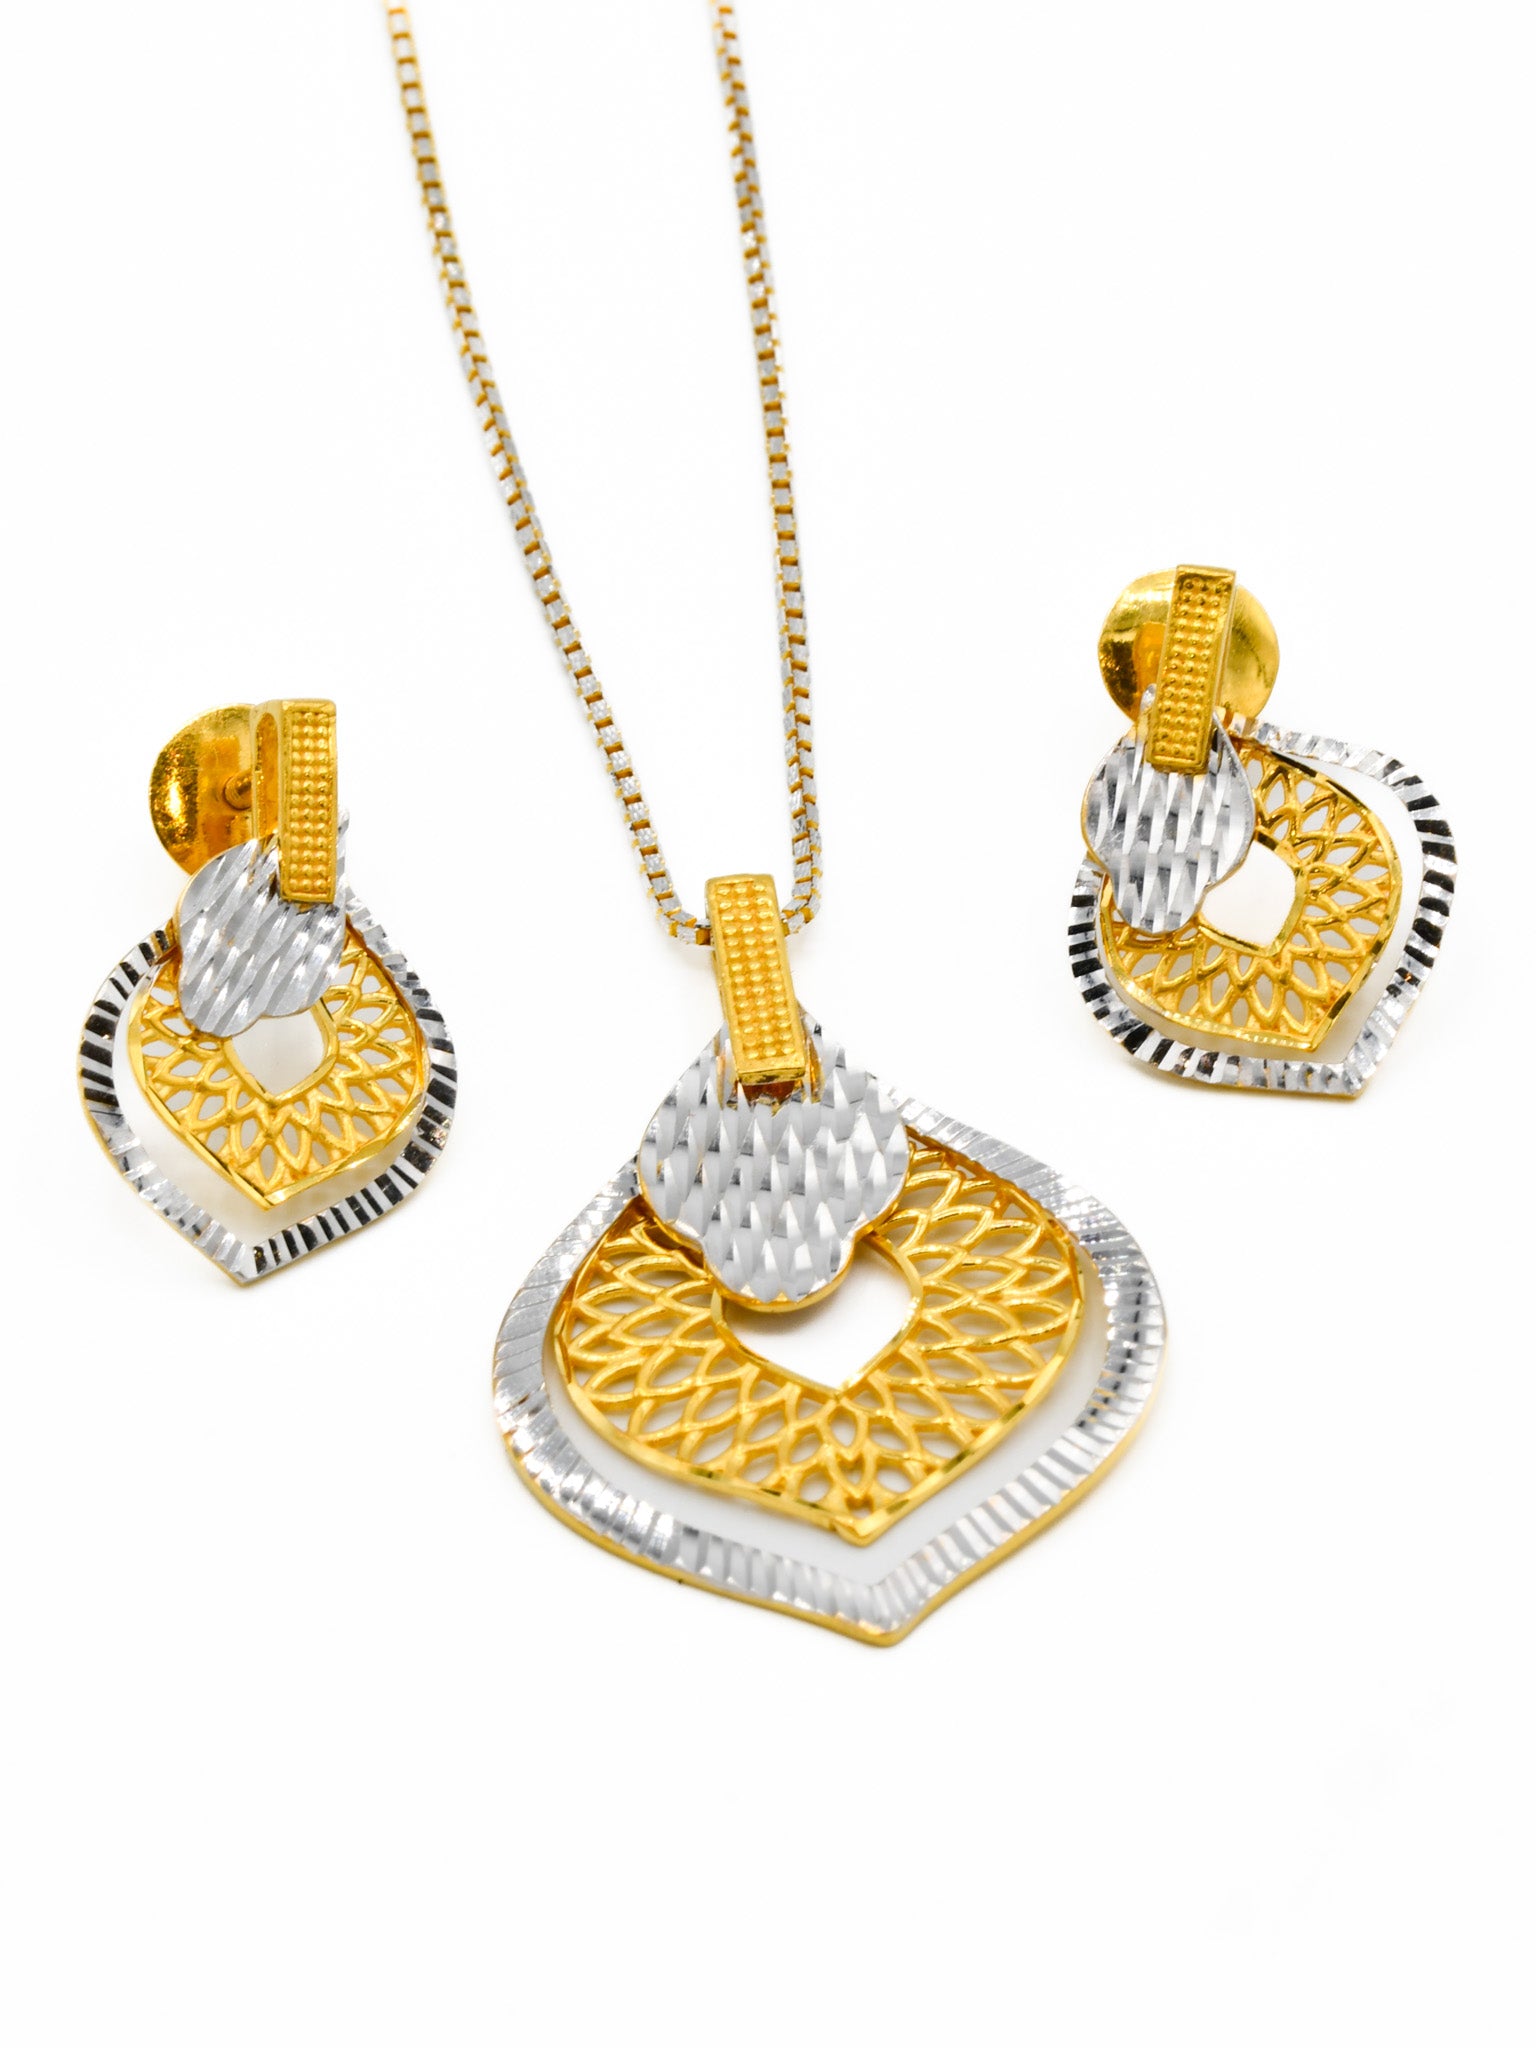 22ct Gold Two Tone Pendant Earring Set - Roop Darshan